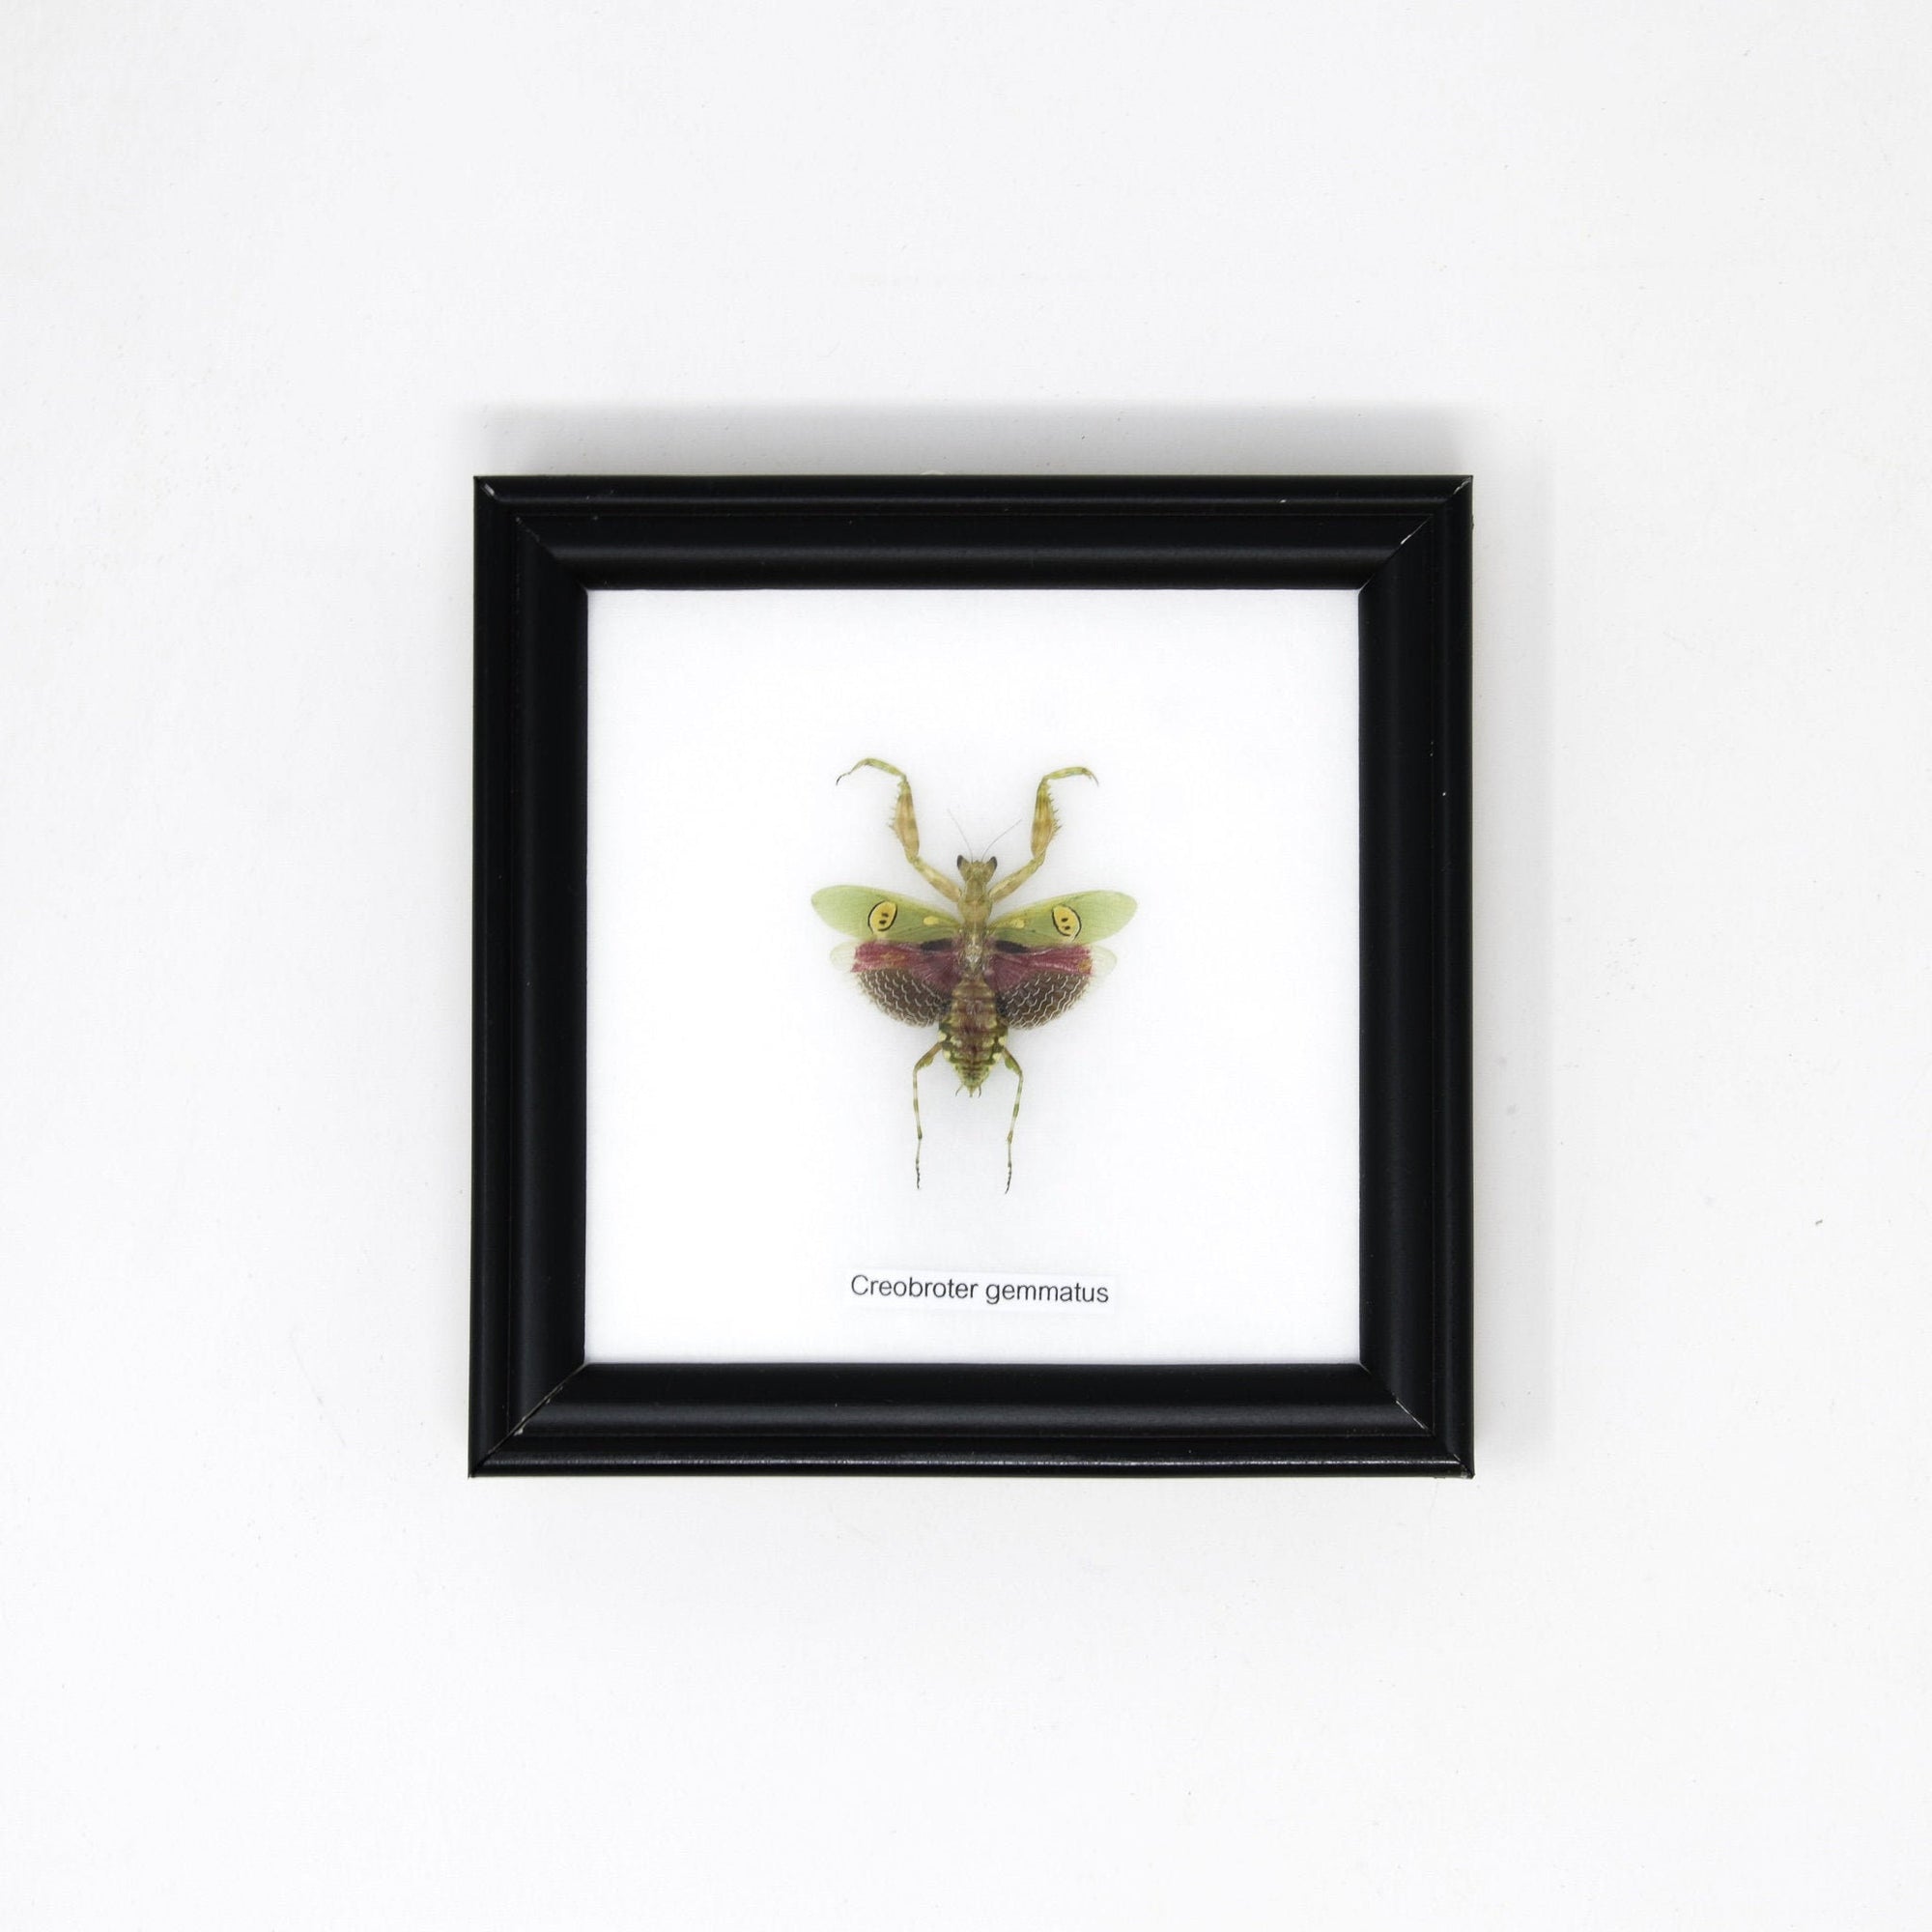 Jeweled Flower Mantis FRAMED (Creobroter gemmatus) | Real Insect Mounted Under Glass, Wall Hanging Home Décor Framed 5 x 5 In. Gift Boxed